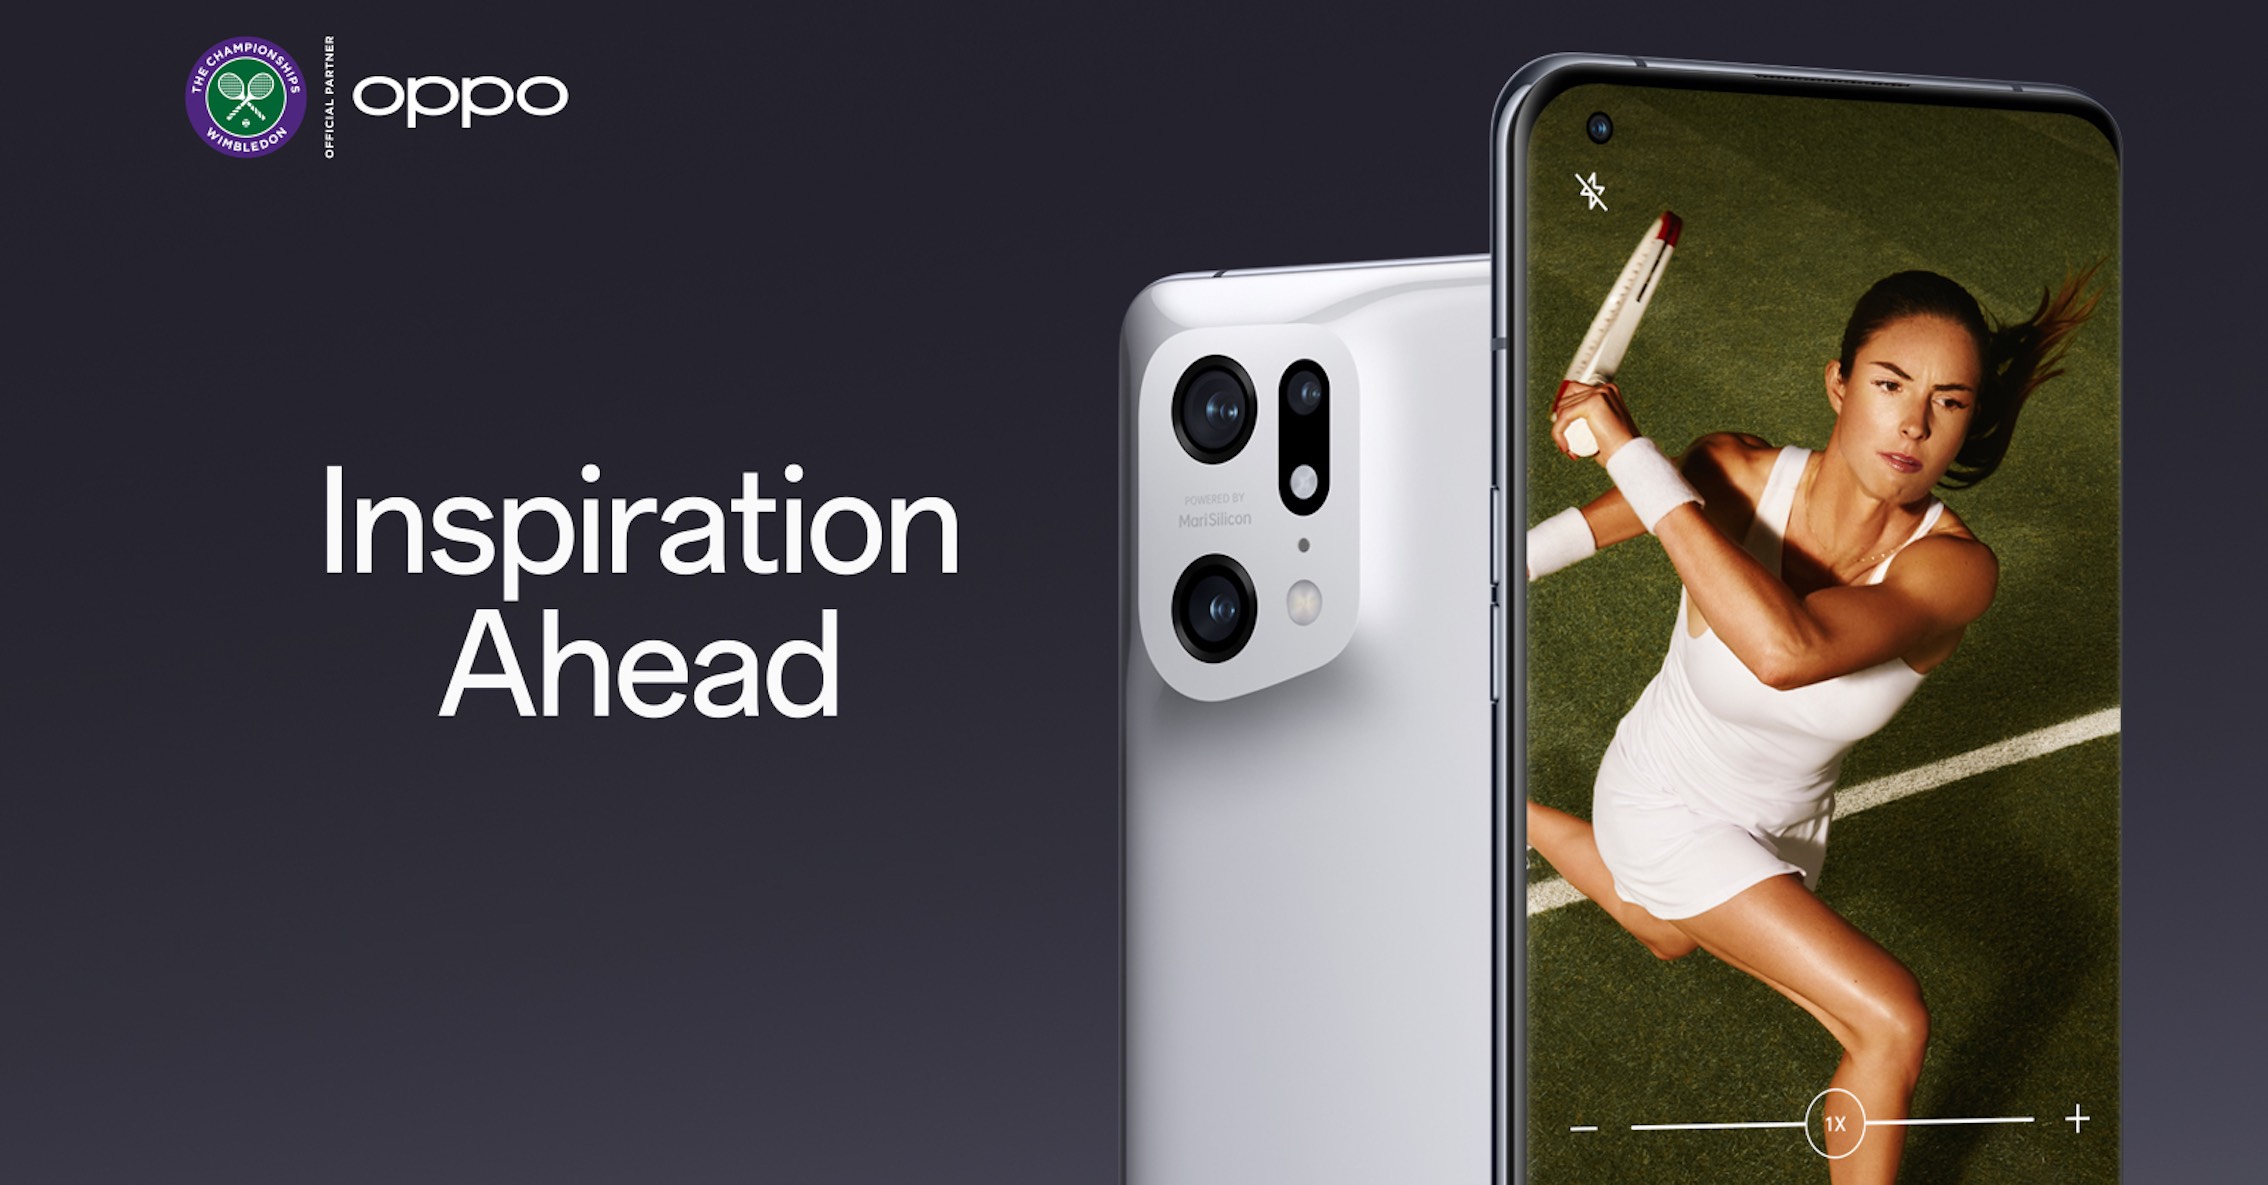 OPPO, Global Partner of Wimbledon for the 4th consecutive year